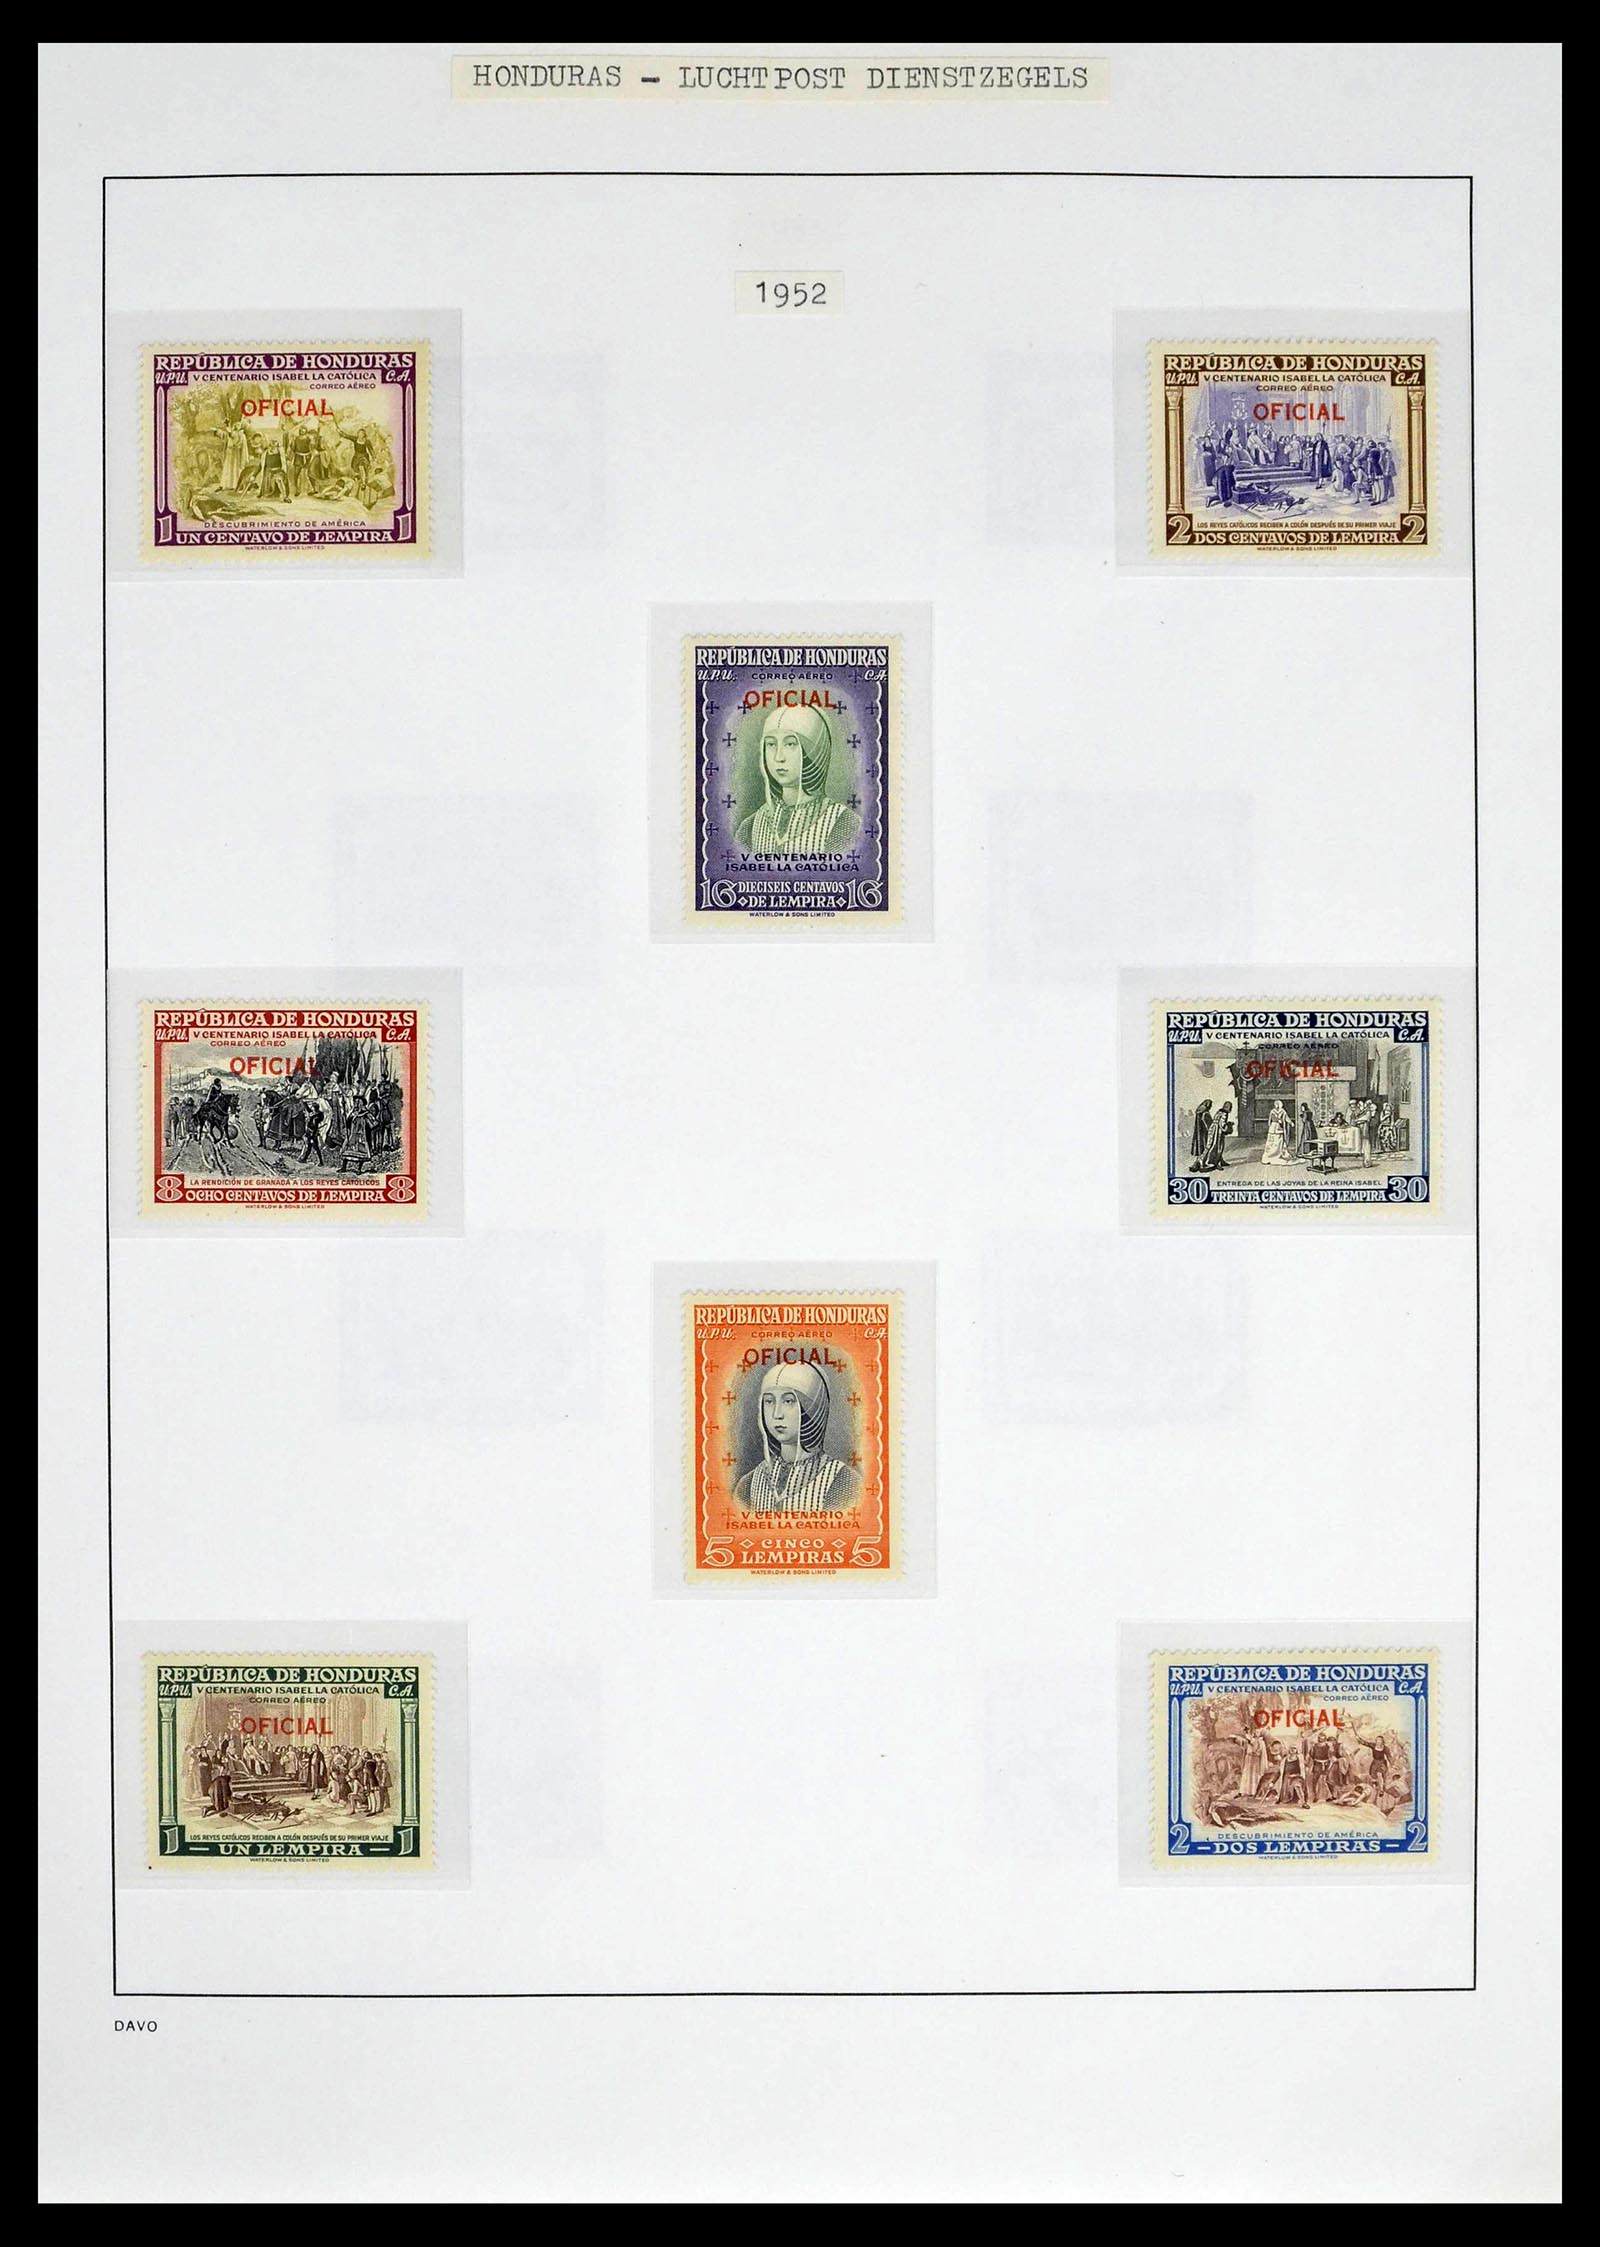 39404 0027 - Stamp collection 39404 Honduras service stamps 1890-1974.